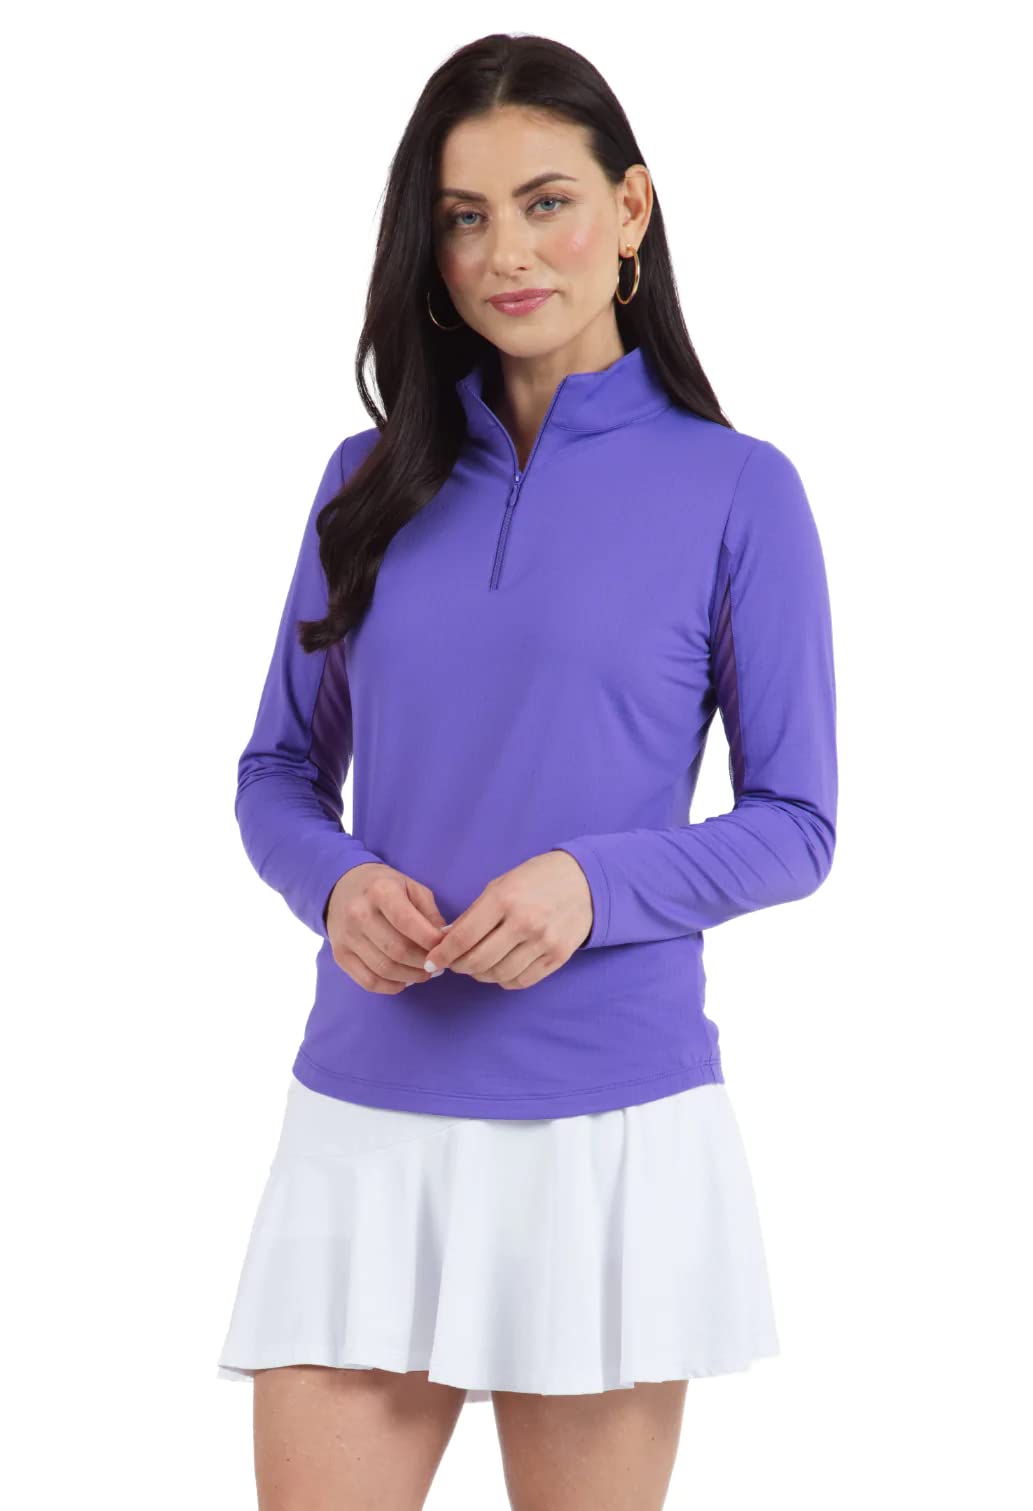 IBKUL Athleisure Wear Sun Protective UPF 50+ Icefil Cooling Tech Long Sleeve Mock Neck Top with Under Arm Mesh 80000 Plum Solid XS